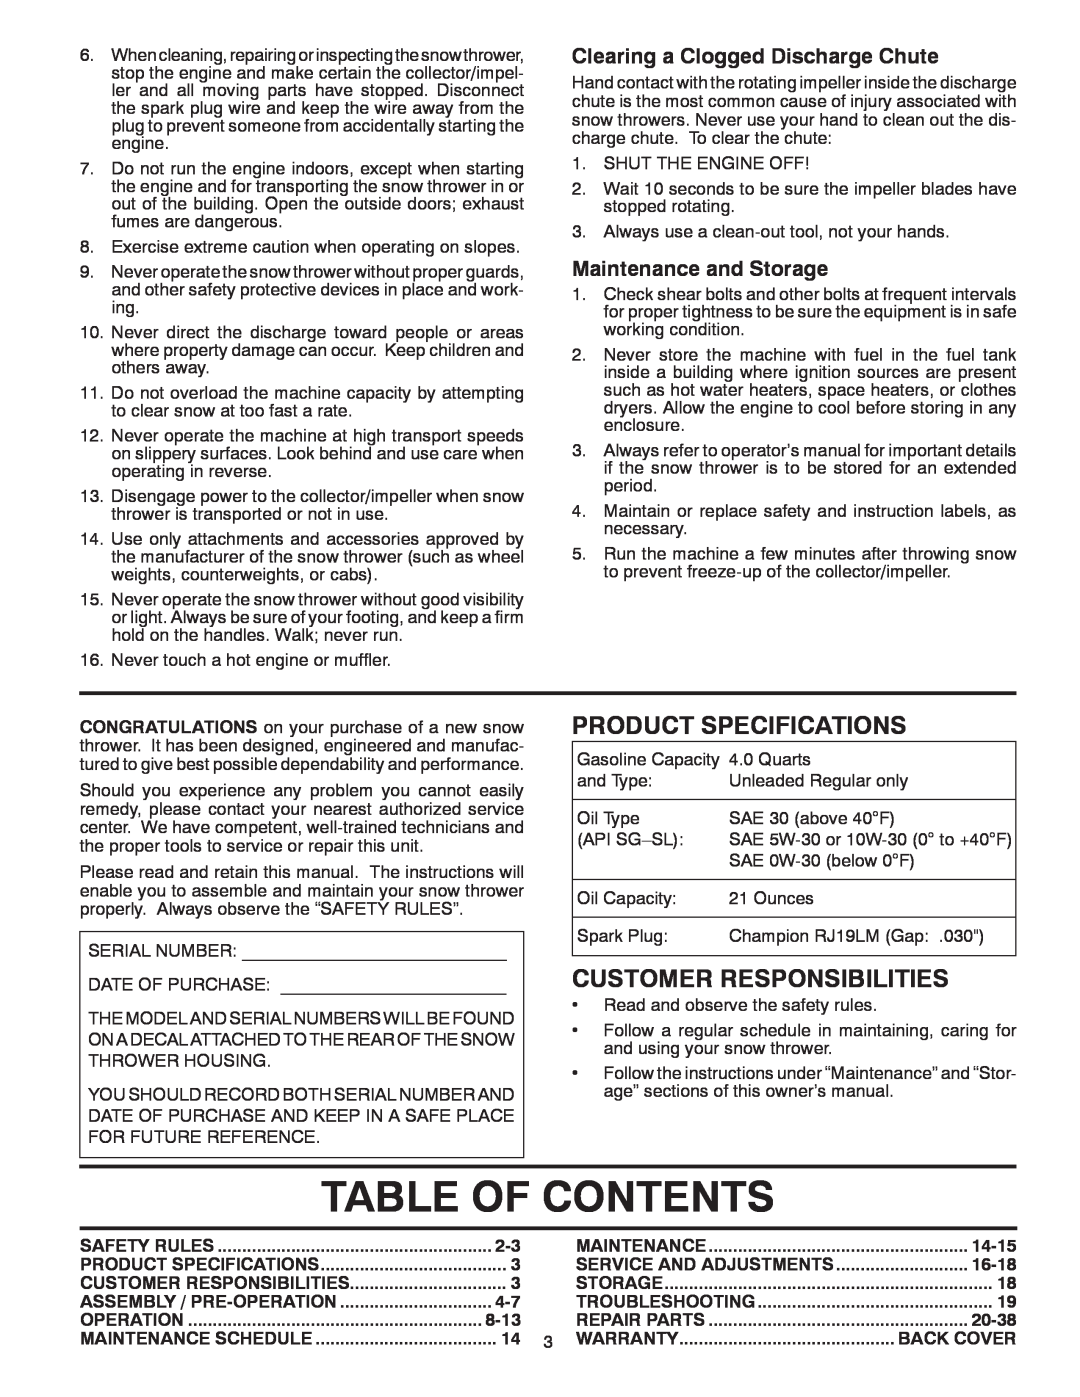 Poulan 96192002000 Table Of Contents, Product Specifications, Customer Responsibilities, Maintenance and Storage, 14-15 